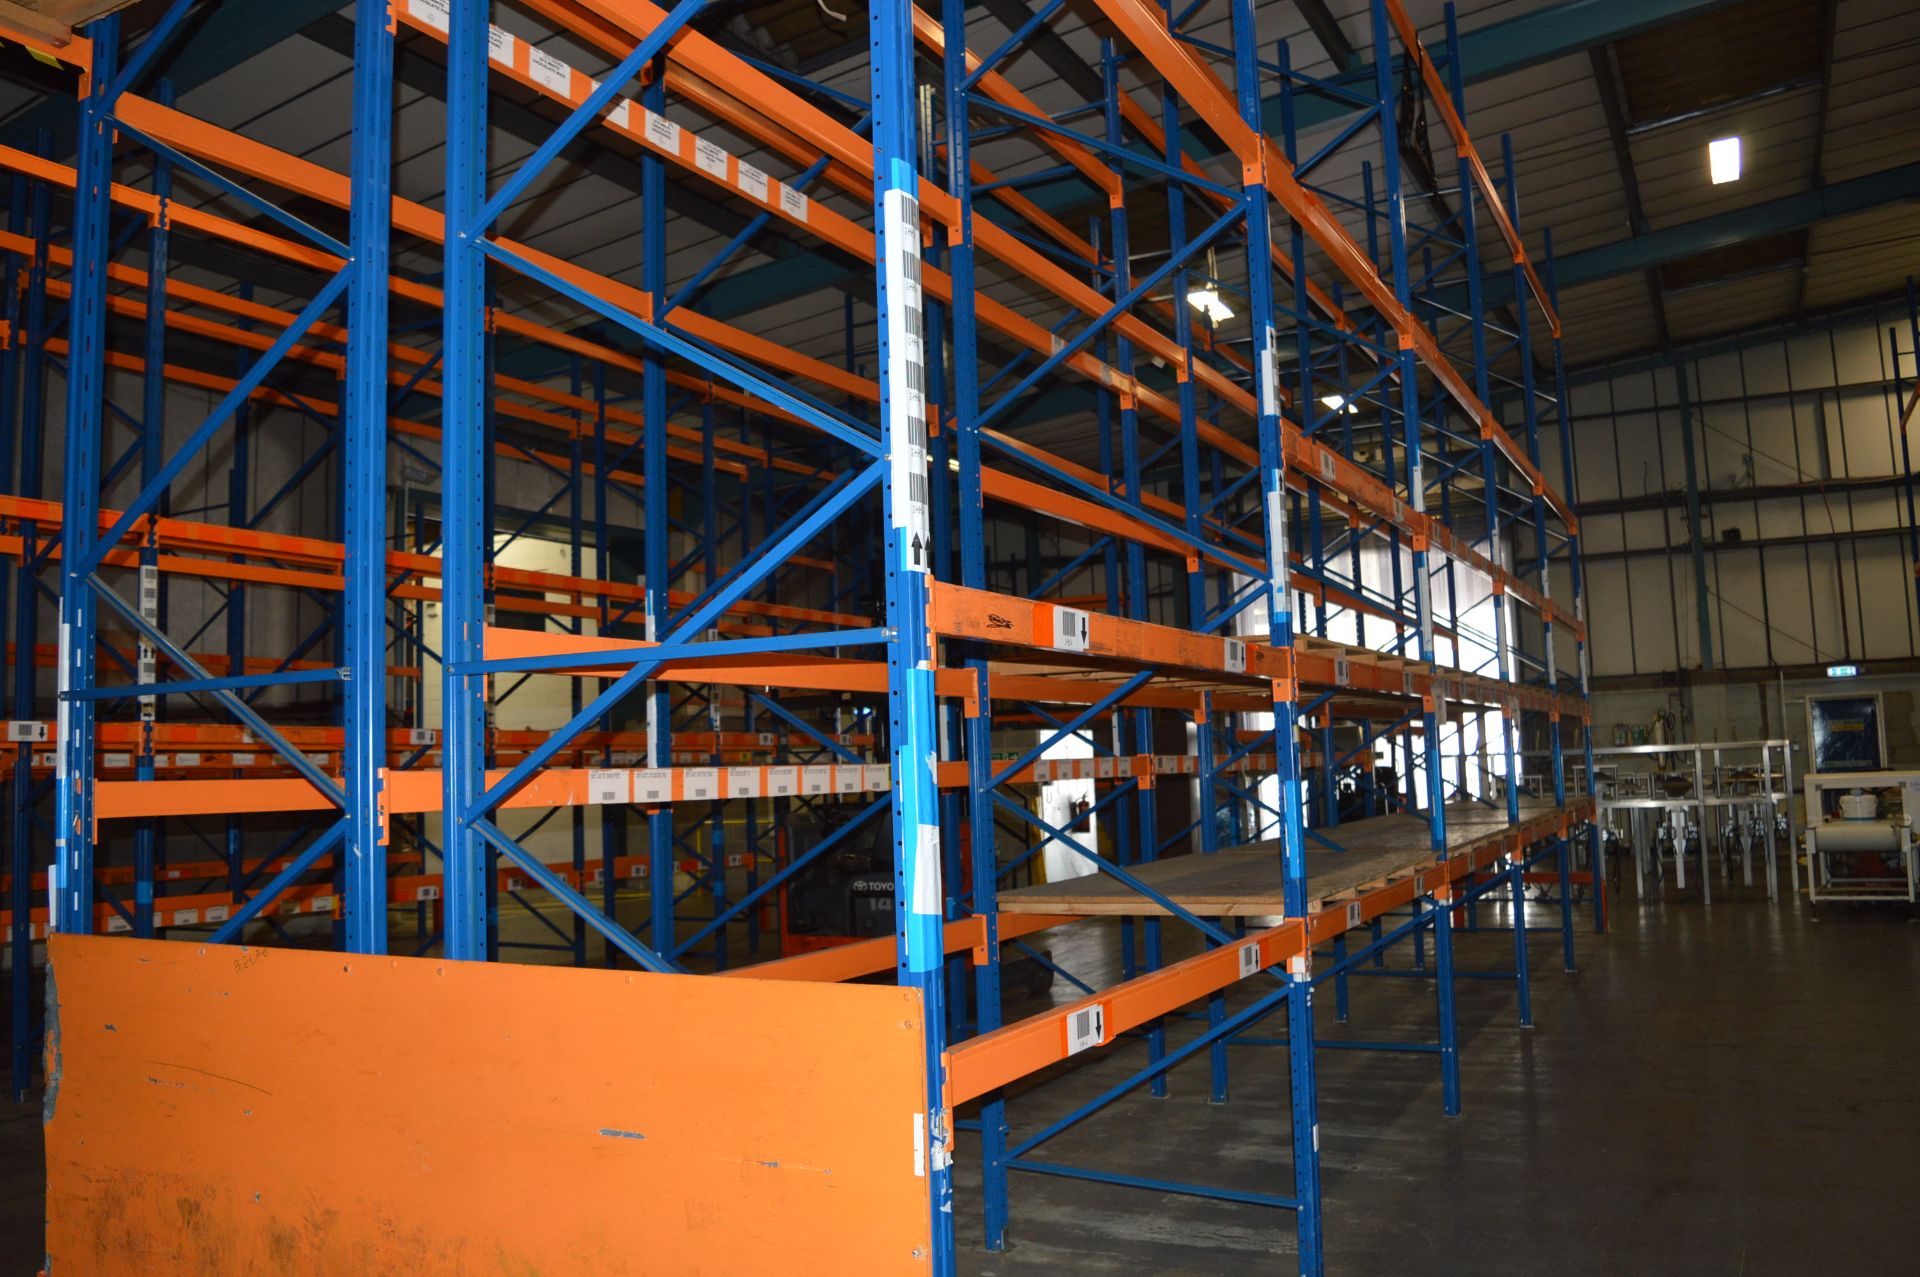 *Five Bays of Medium Duty Pallet Racking (2.2m wide, 1.1m deep, 6m high) Comprising Six Uprights and